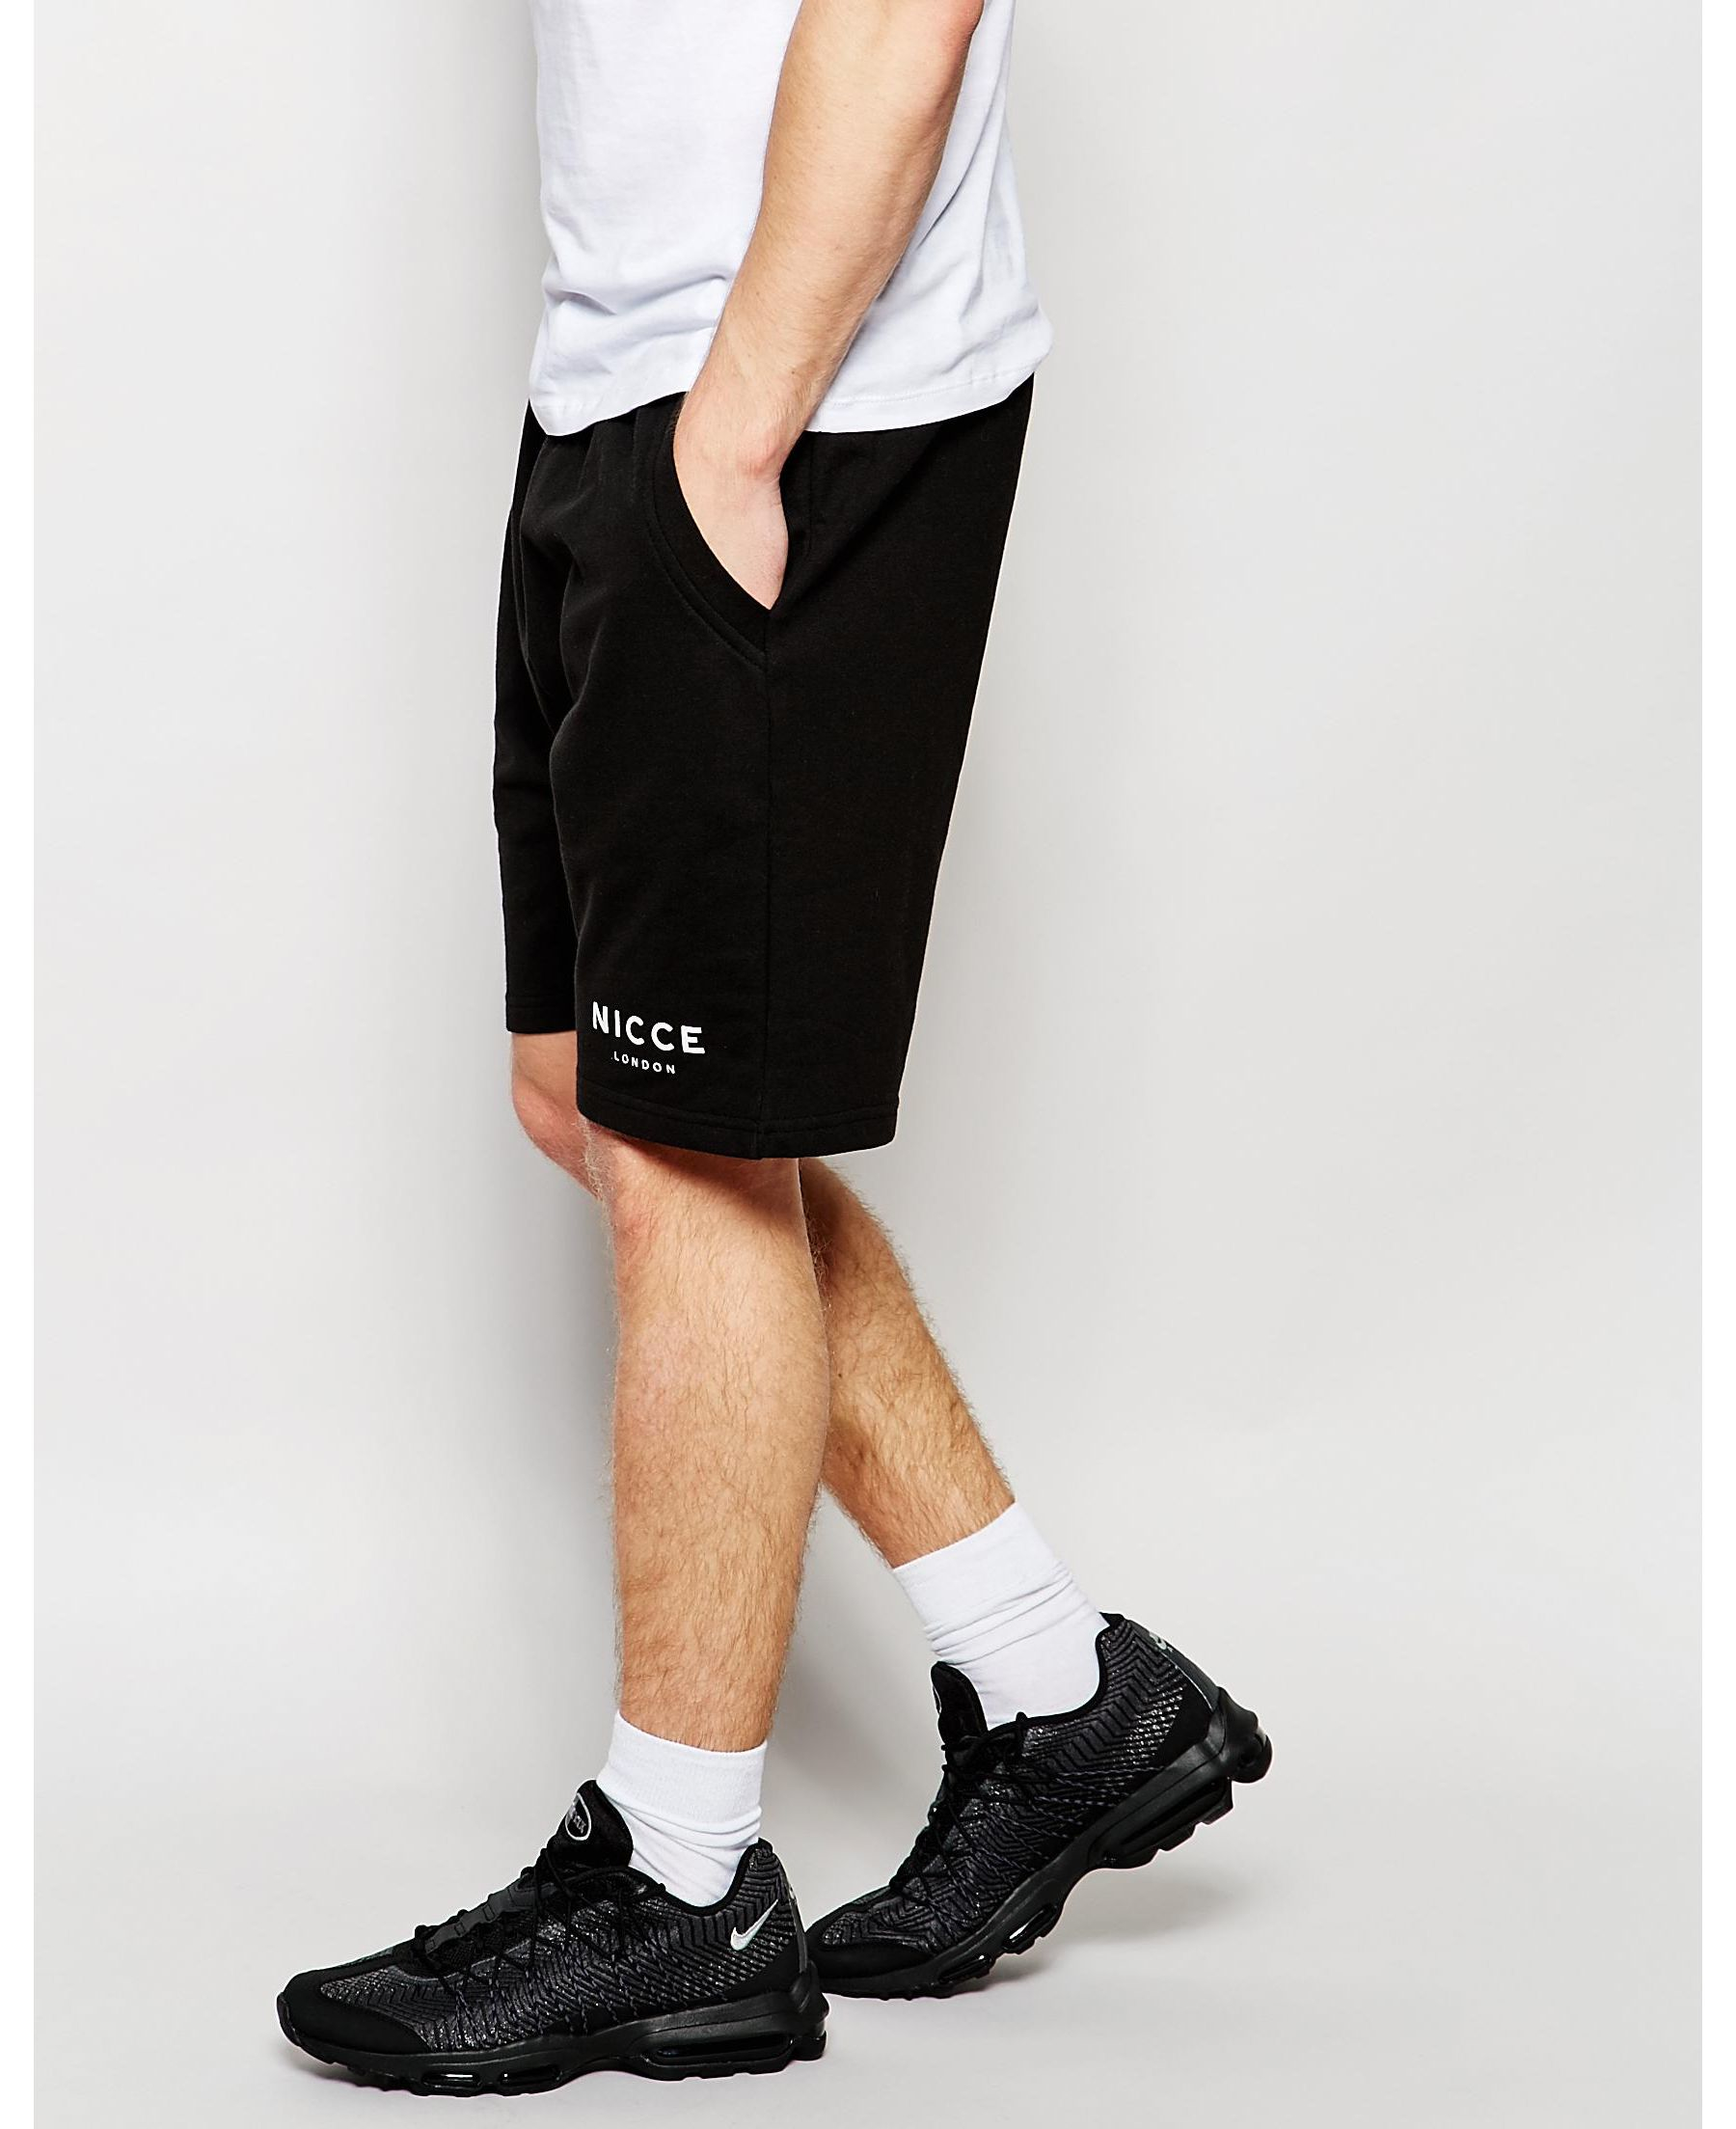 Nicce London Sweat Shorts With Logo in Black for Men - Lyst